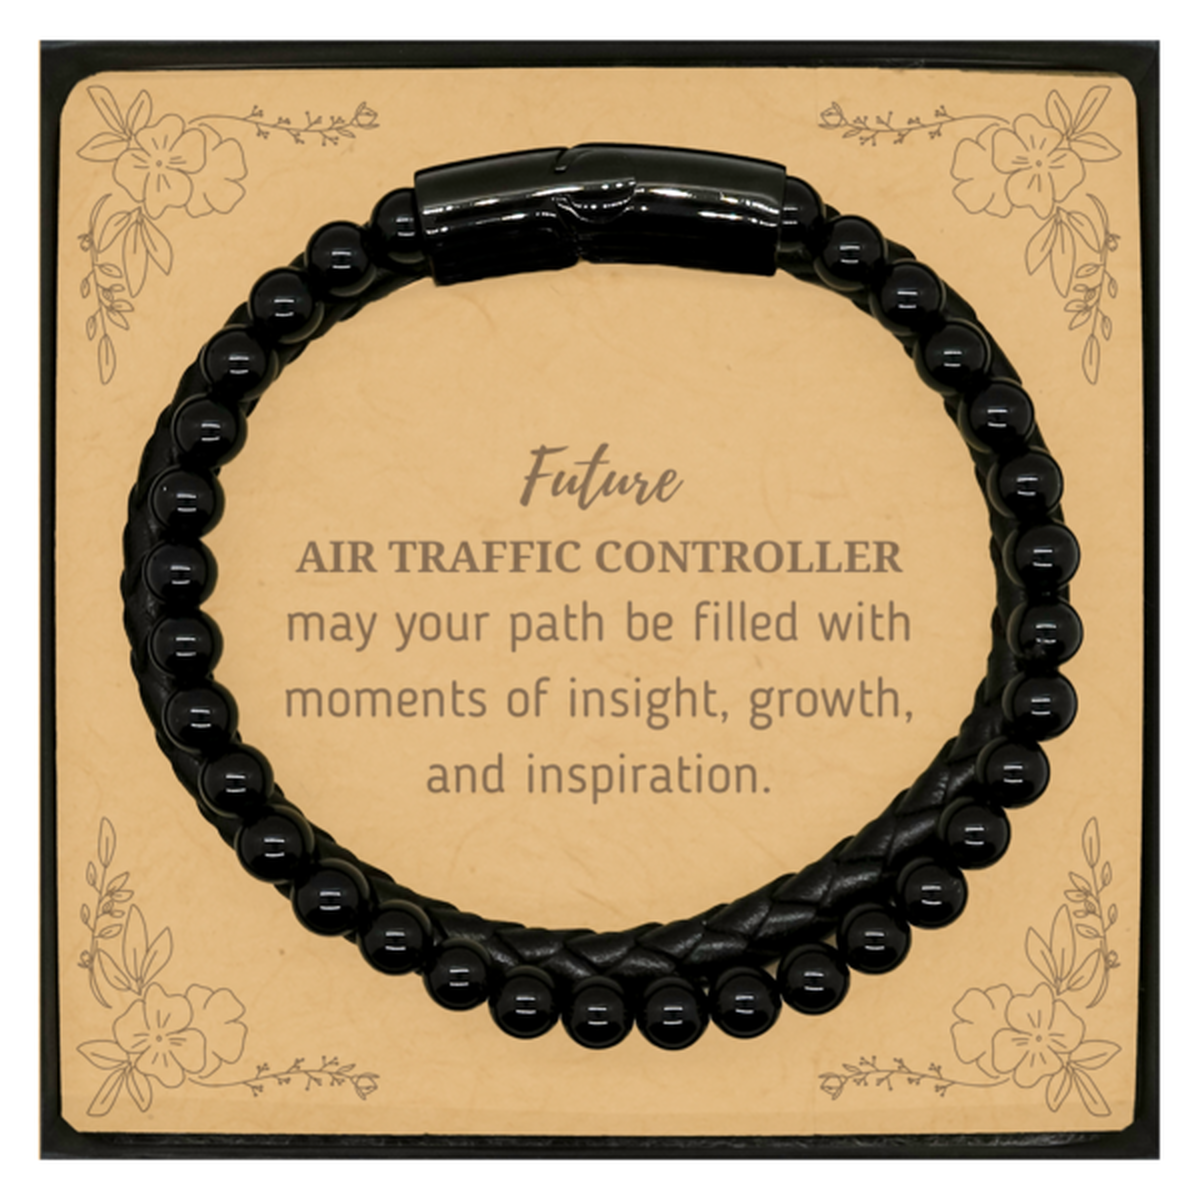 Future Air Traffic Controller Gifts, May your path be filled with moments of insight, Graduation Gifts for New Air Traffic Controller, Christmas Unique Stone Leather Bracelets For Men, Women, Friends